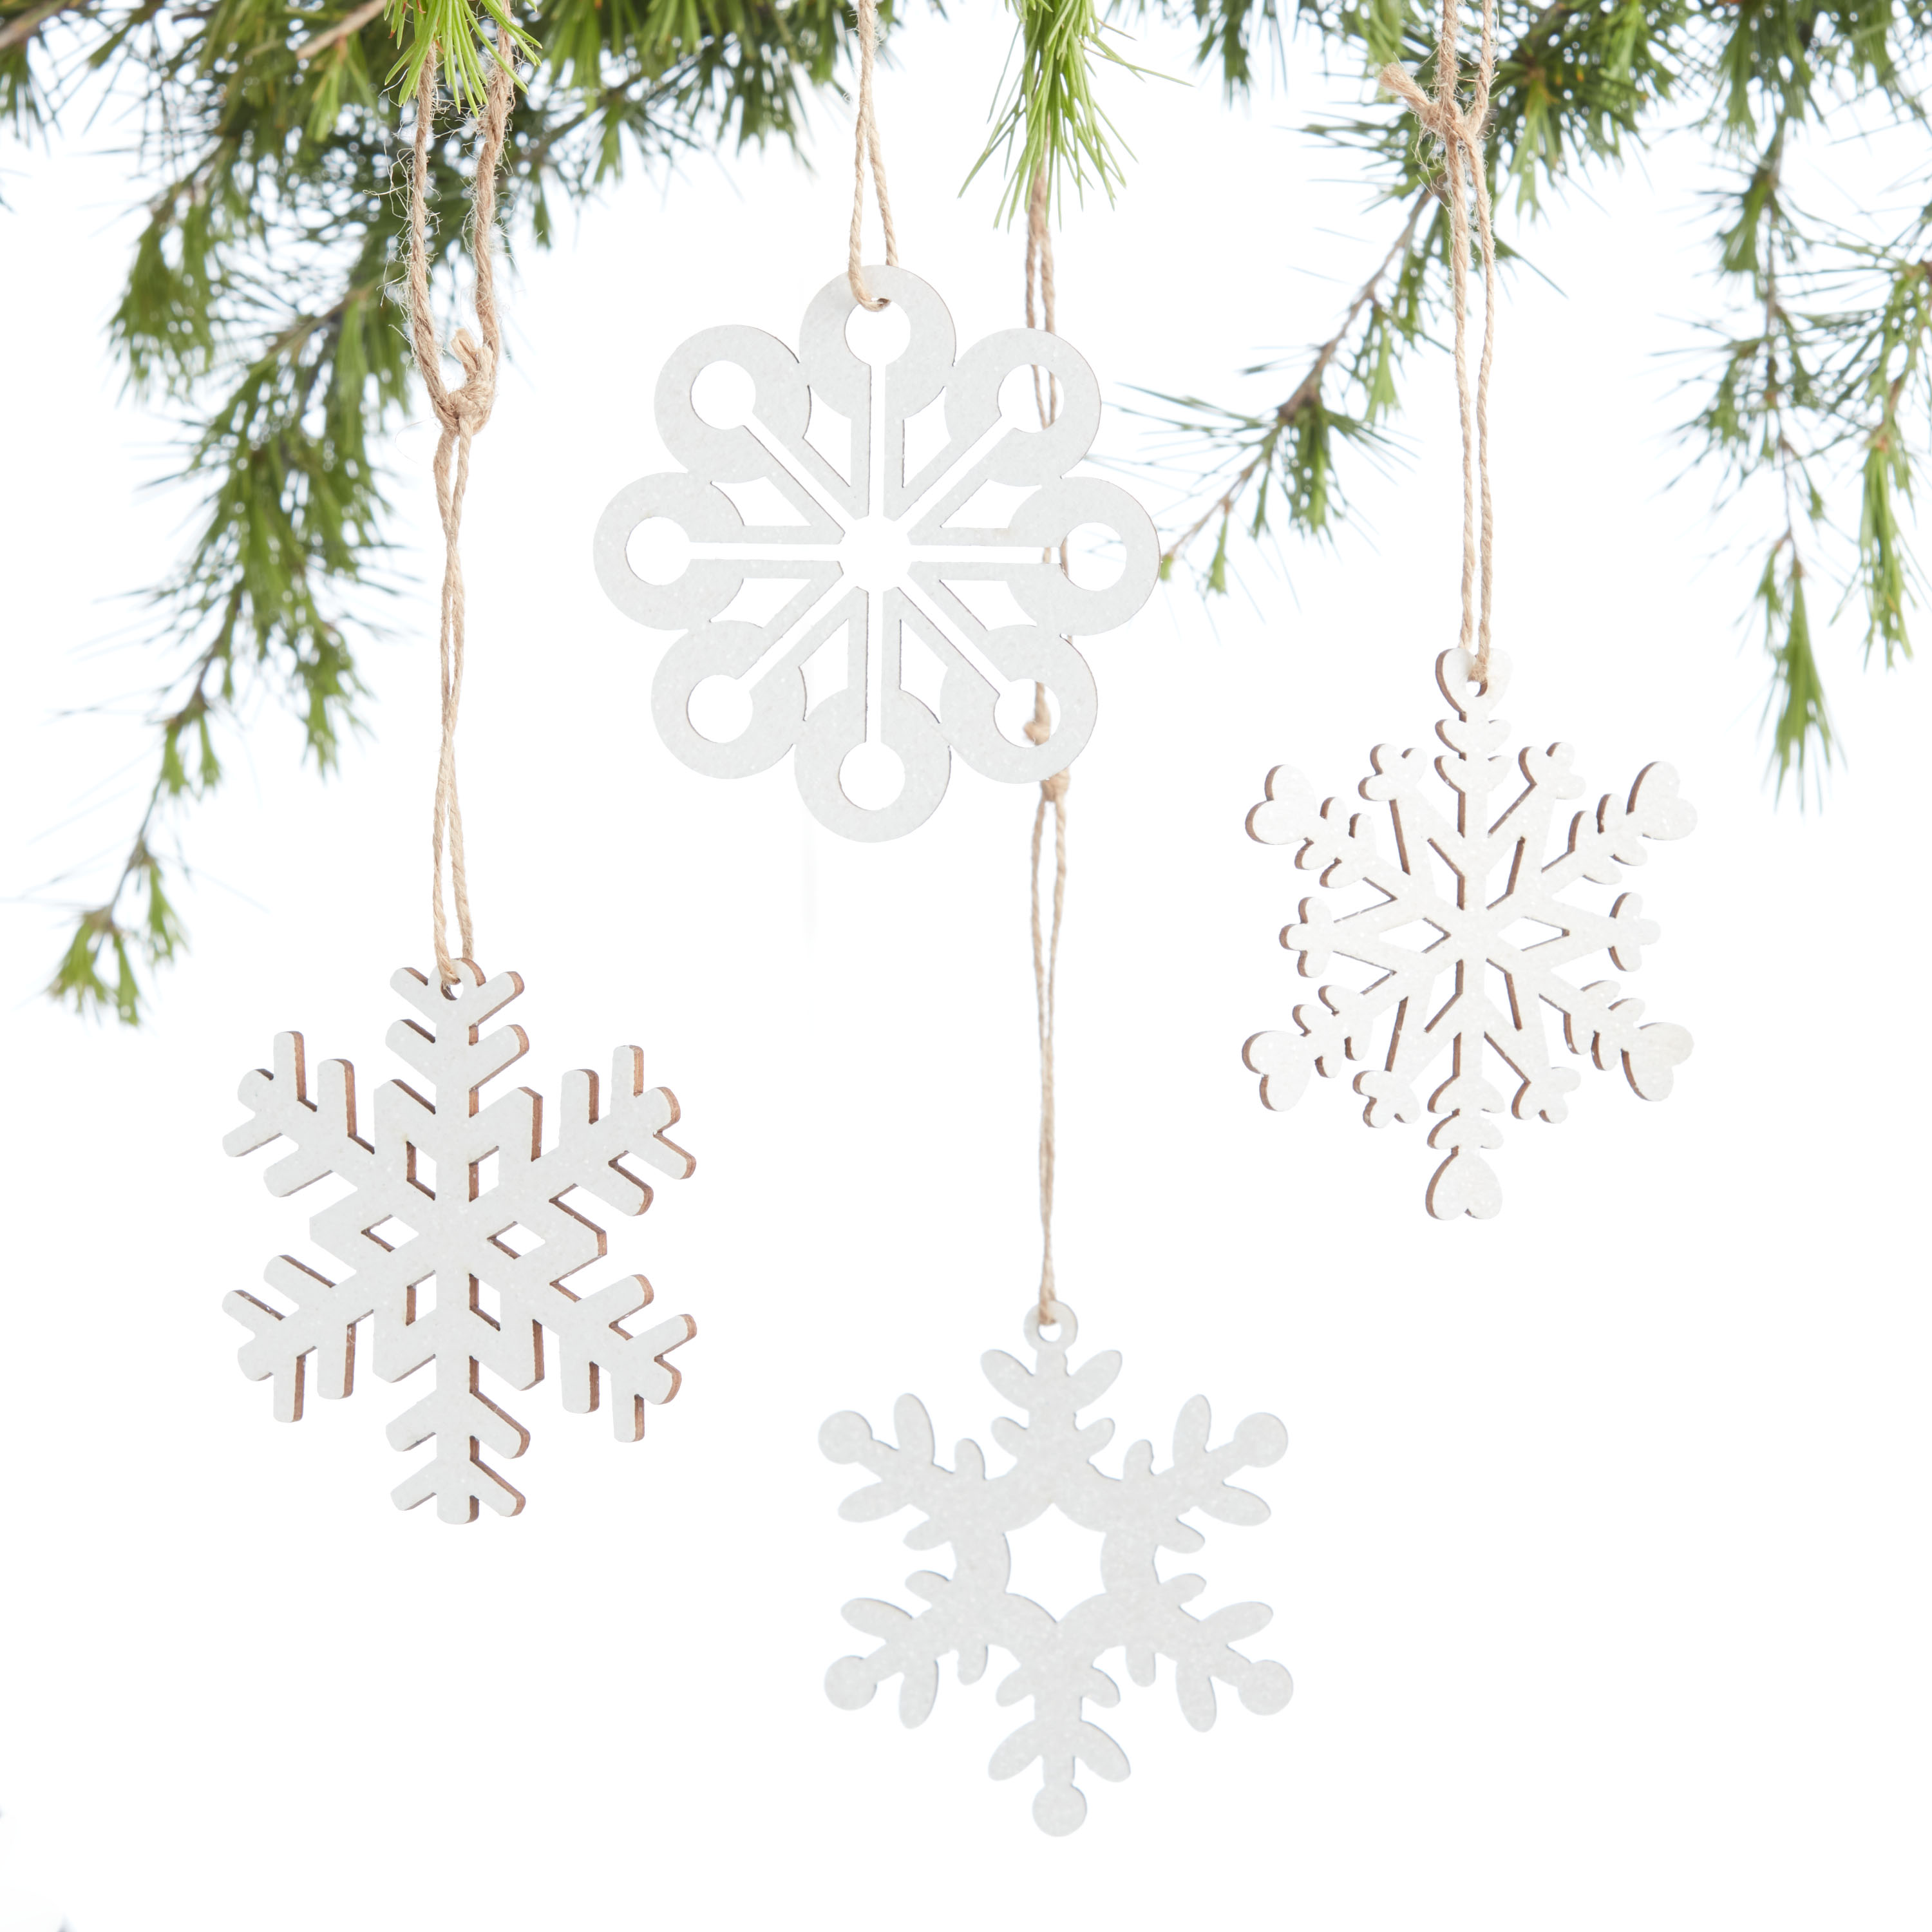 5 Red & White Snowflakes Assorted Set Of 12